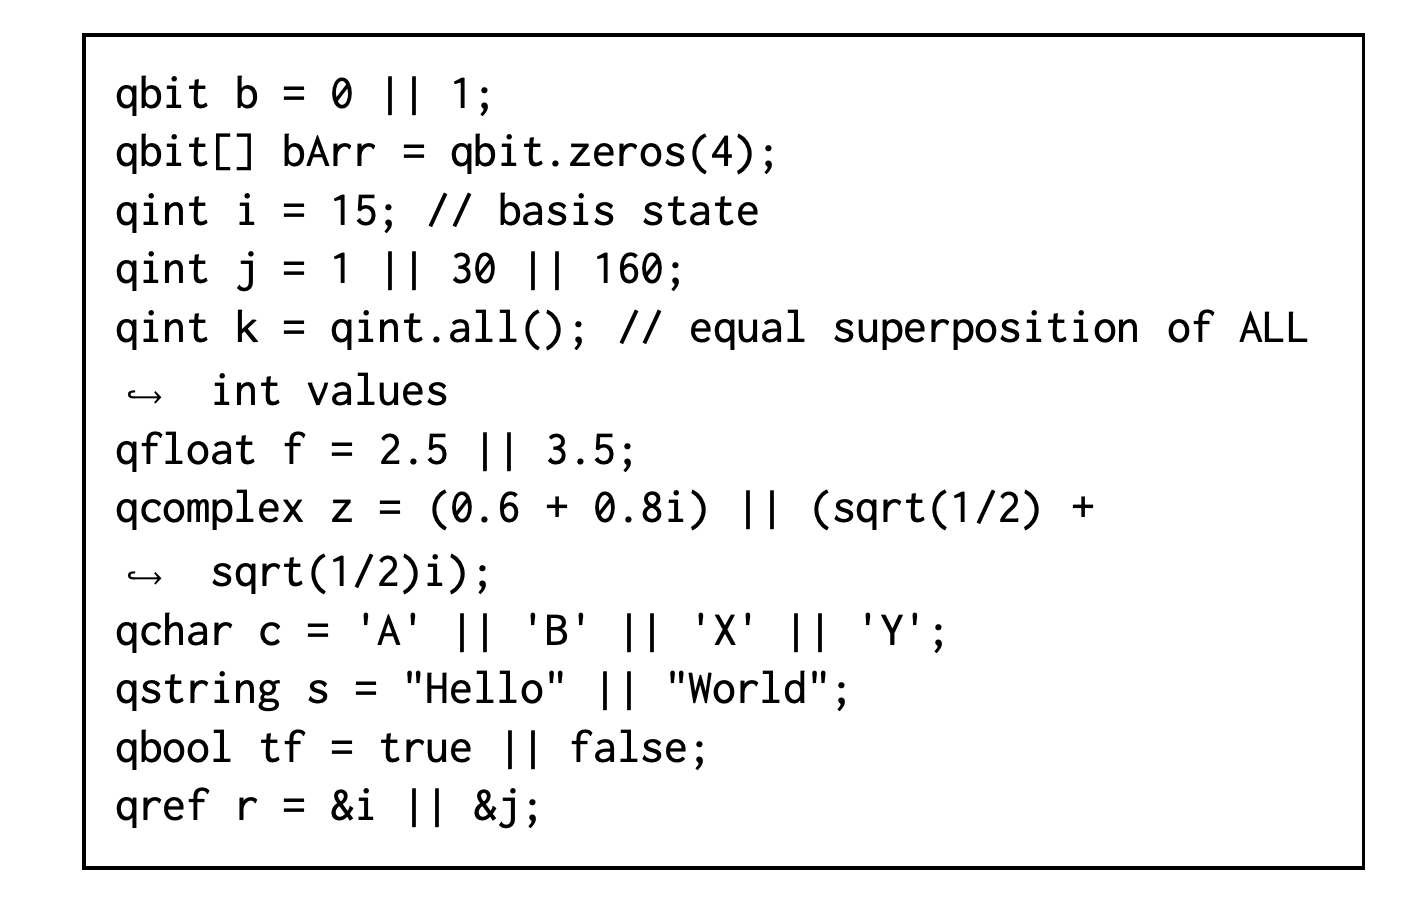 Rhyme: The High-Level Quantum Programming Language Bridging The Gap For Software Engineers